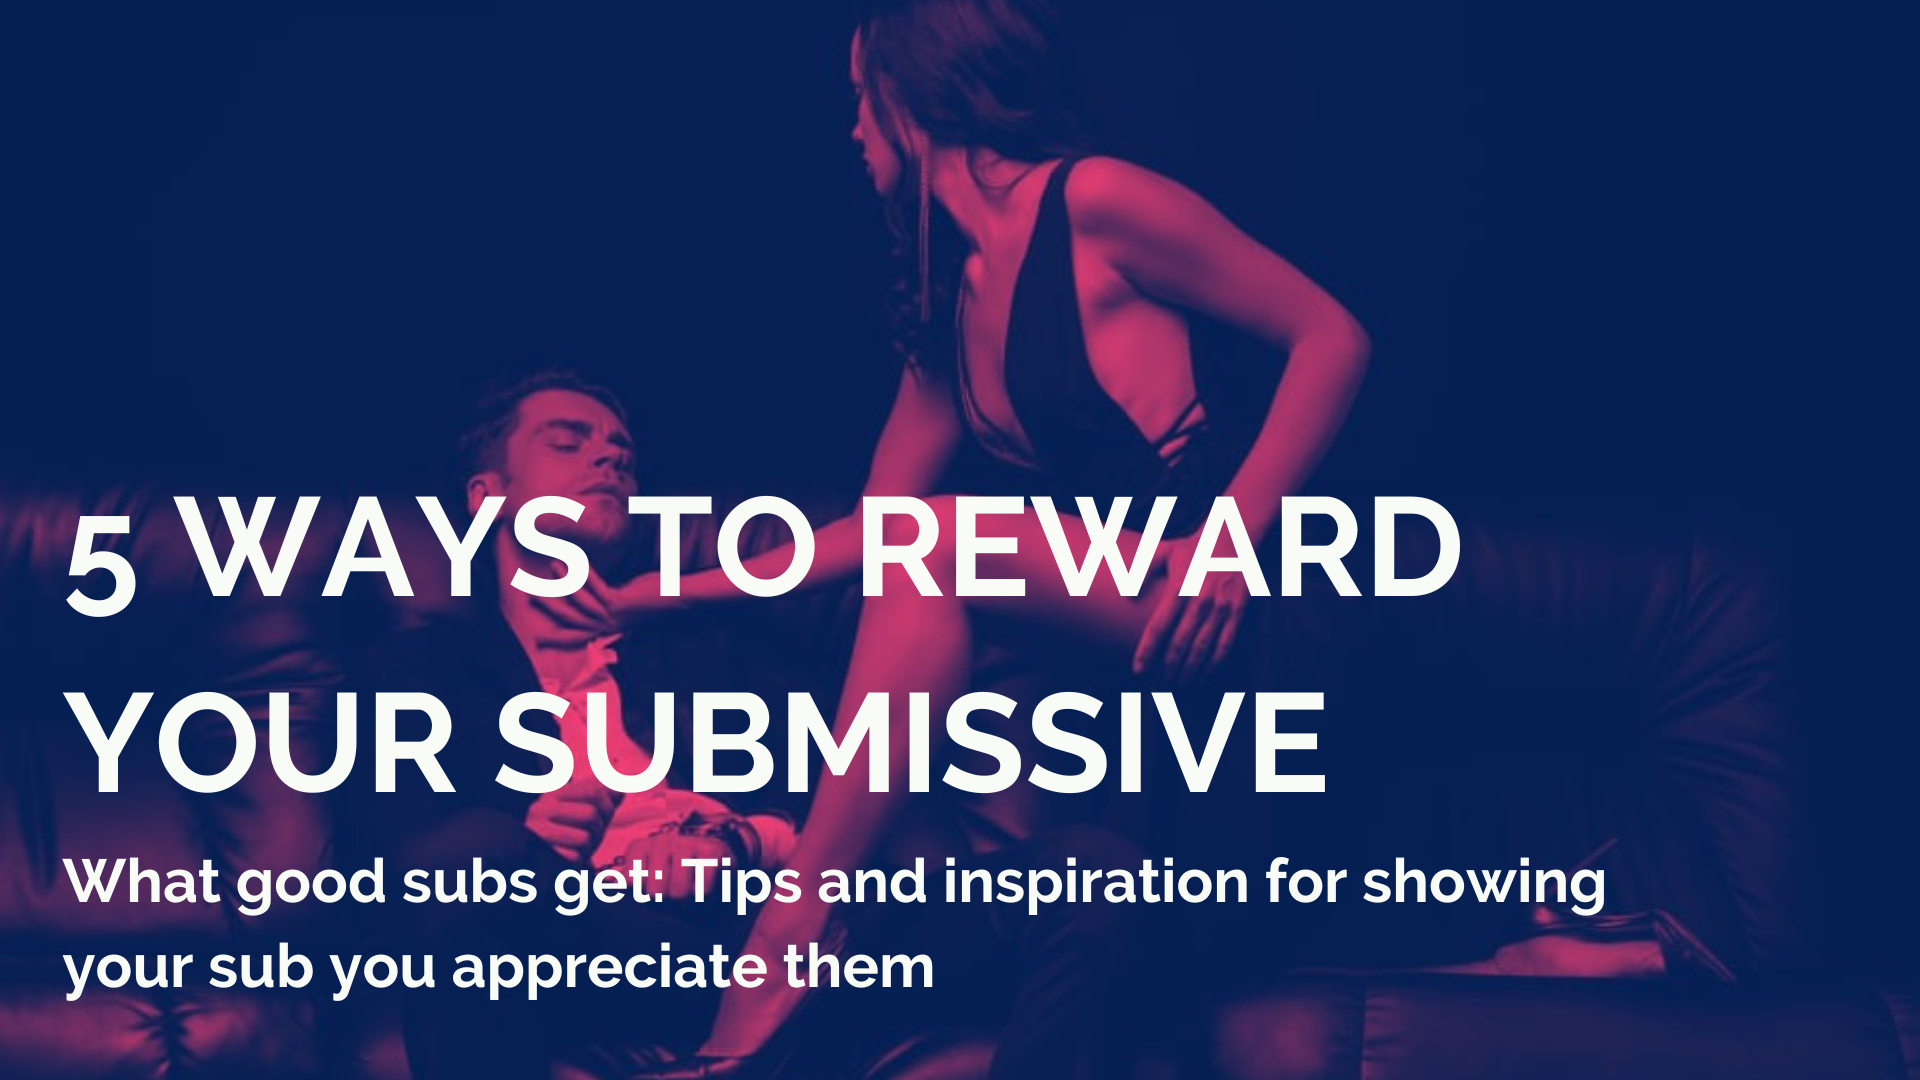 5 Ways to Reward Your Submissive